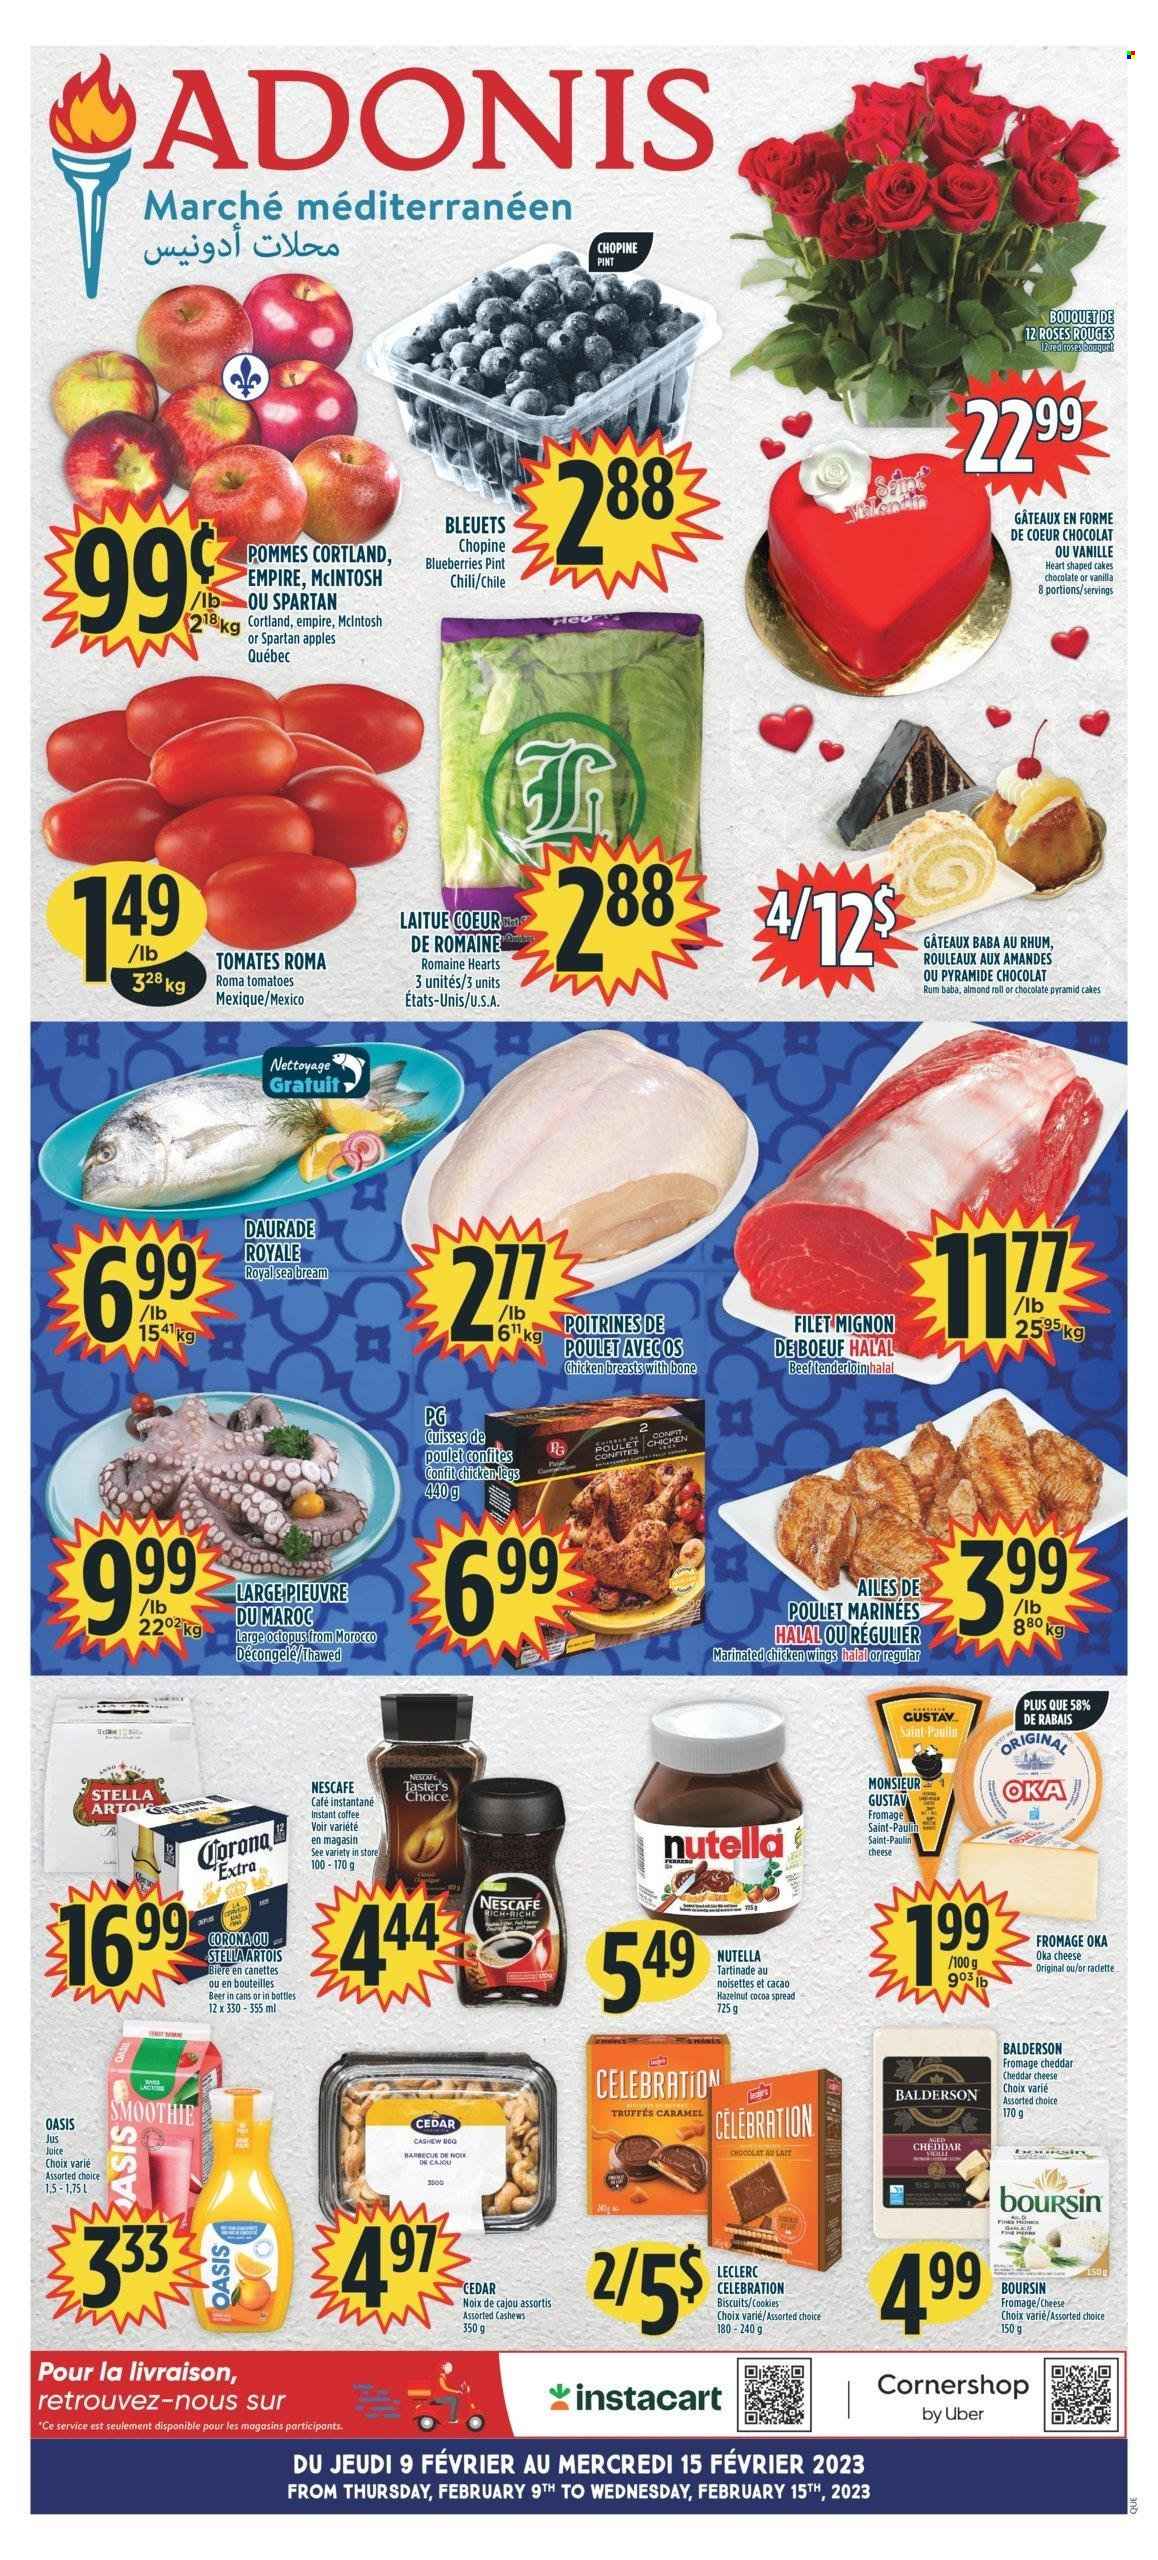 thumbnail - Adonis Flyer - February 09, 2023 - February 15, 2023 - Sales products - cake, tomatoes, apples, blueberries, octopus, seabream, raclette cheese, cheddar, cheese, chicken wings, cookies, chocolate, Celebration, biscuit, cocoa, cashews, juice, smoothie, coffee, instant coffee, rum, beer, Stella Artois, Corona Extra, chicken breasts, marinated chicken, beef meat, beef tenderloin, Nutella, Nescafé. Page 1.